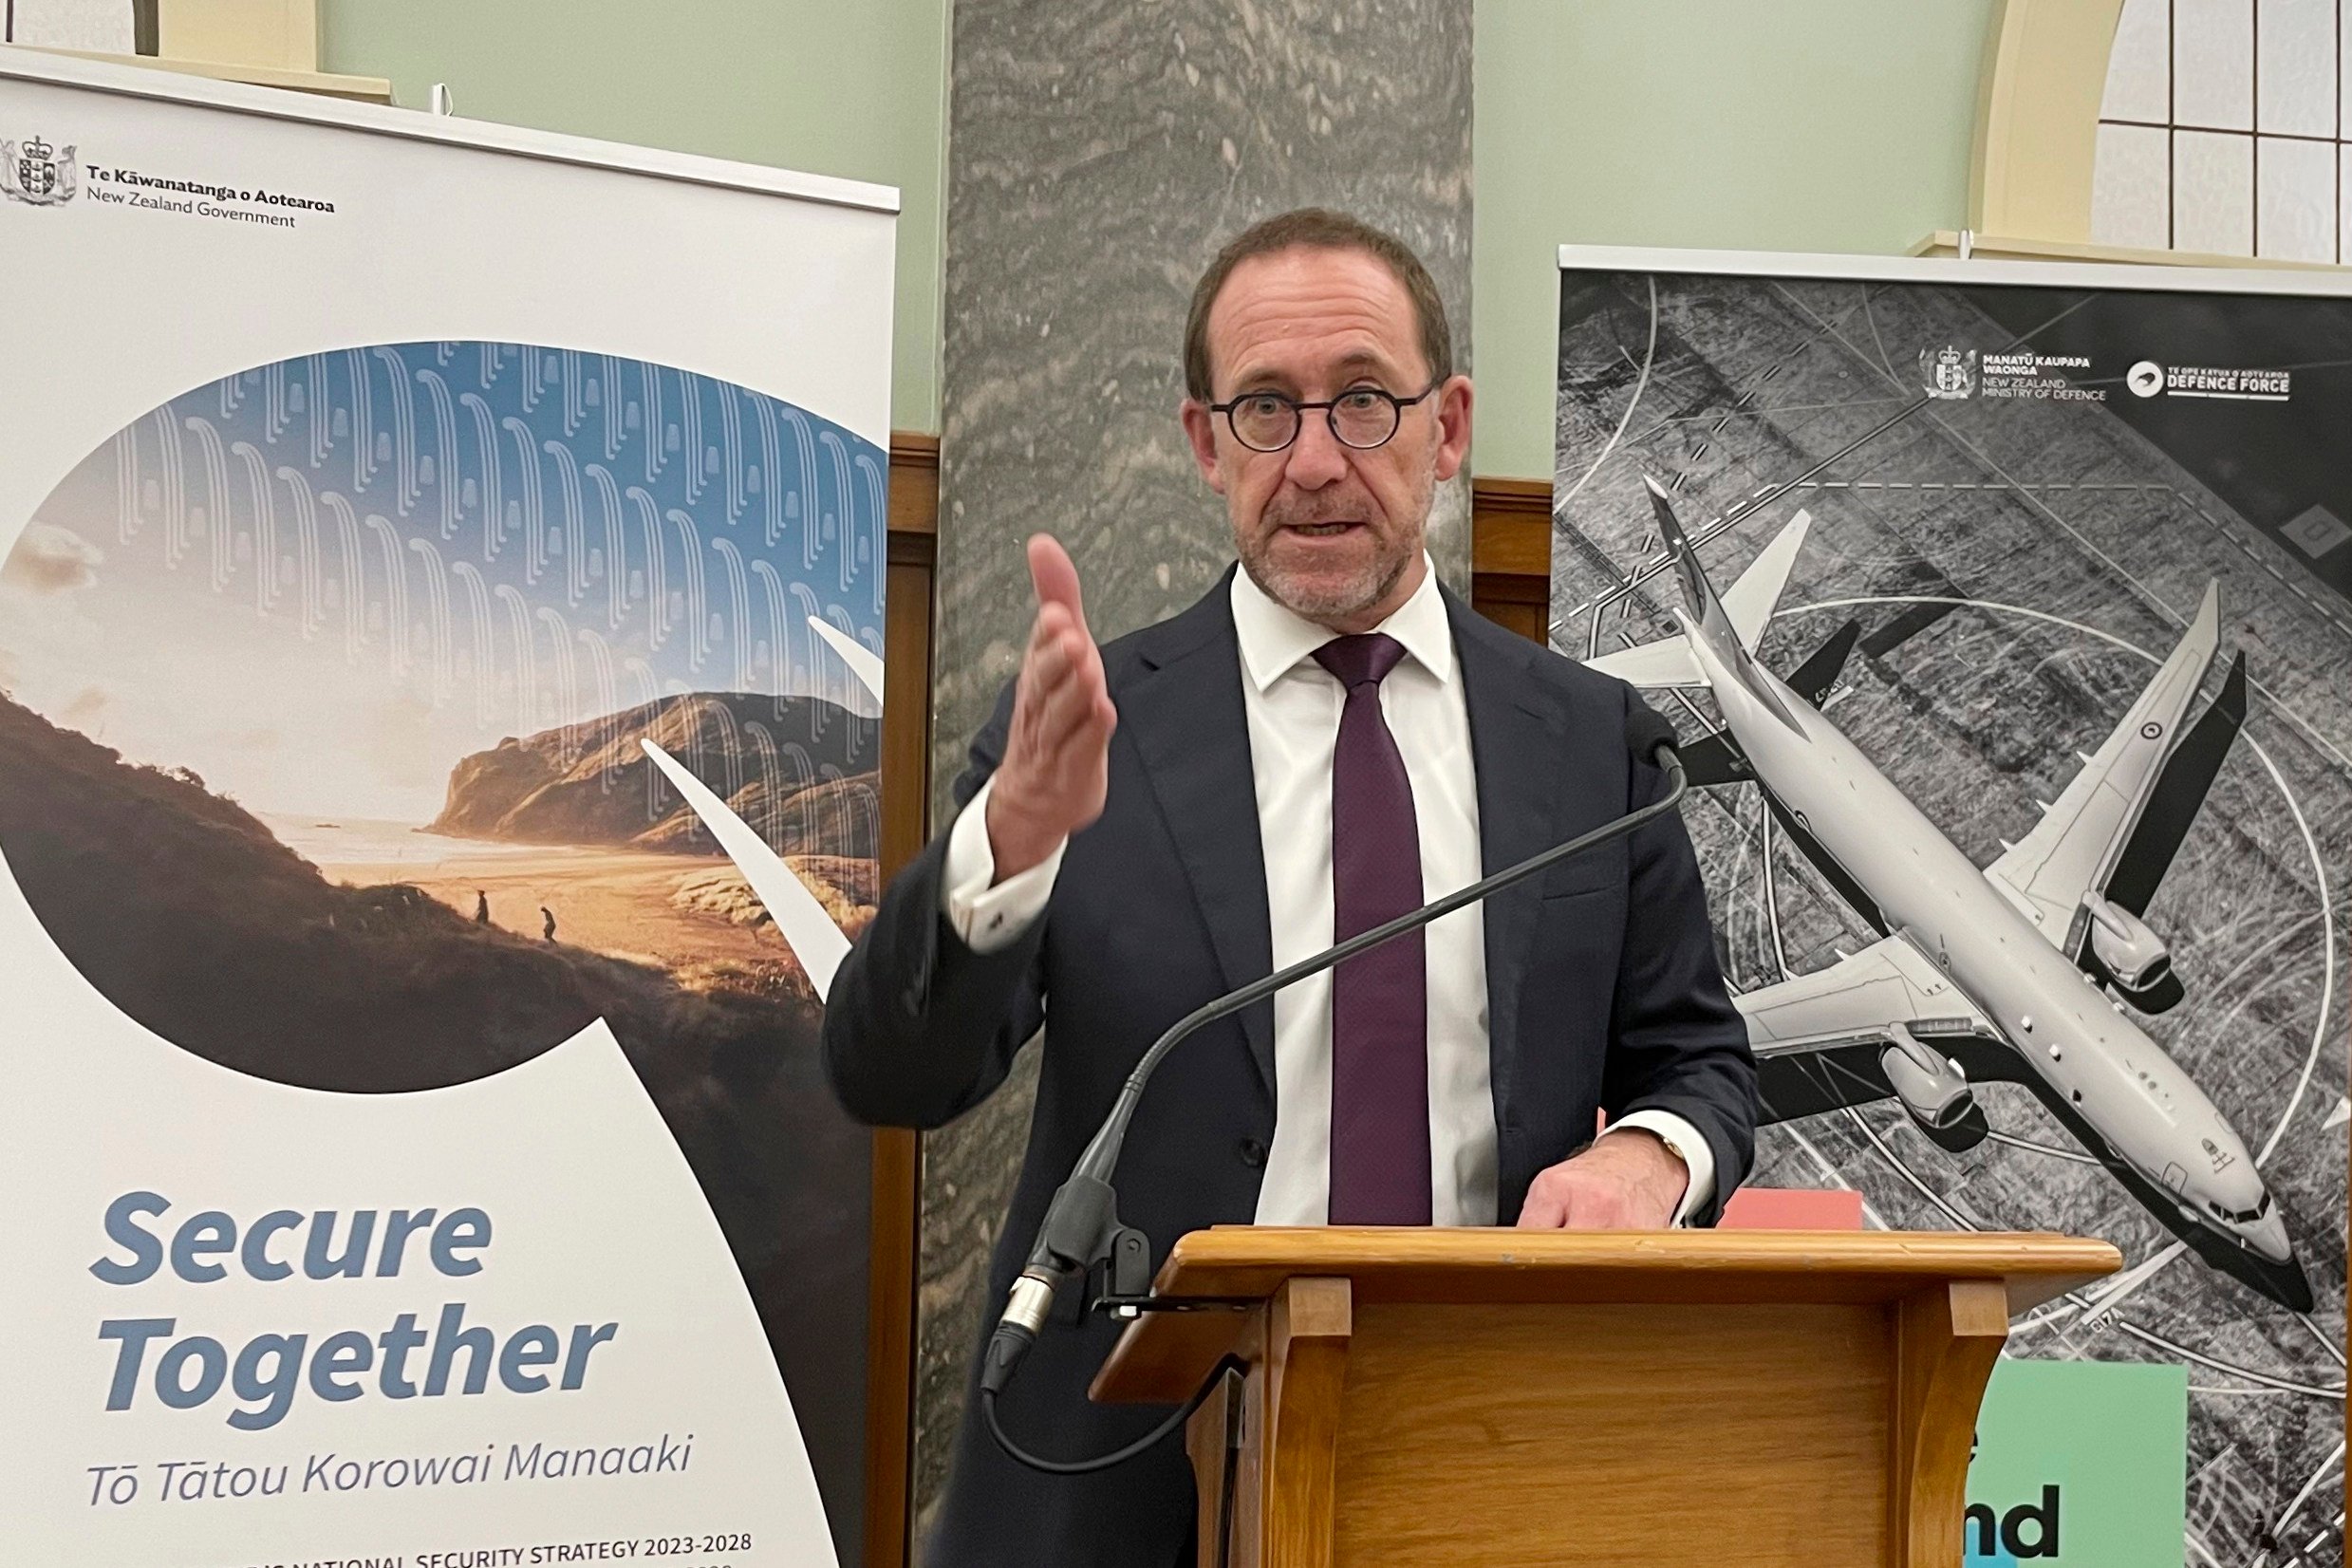 New Zealand Defense Minister Andrew Little unveils the country’s plans to boost its defense capabilities as tensions rise in the Pacific, due in part to a military buildup by China. Photo: AP